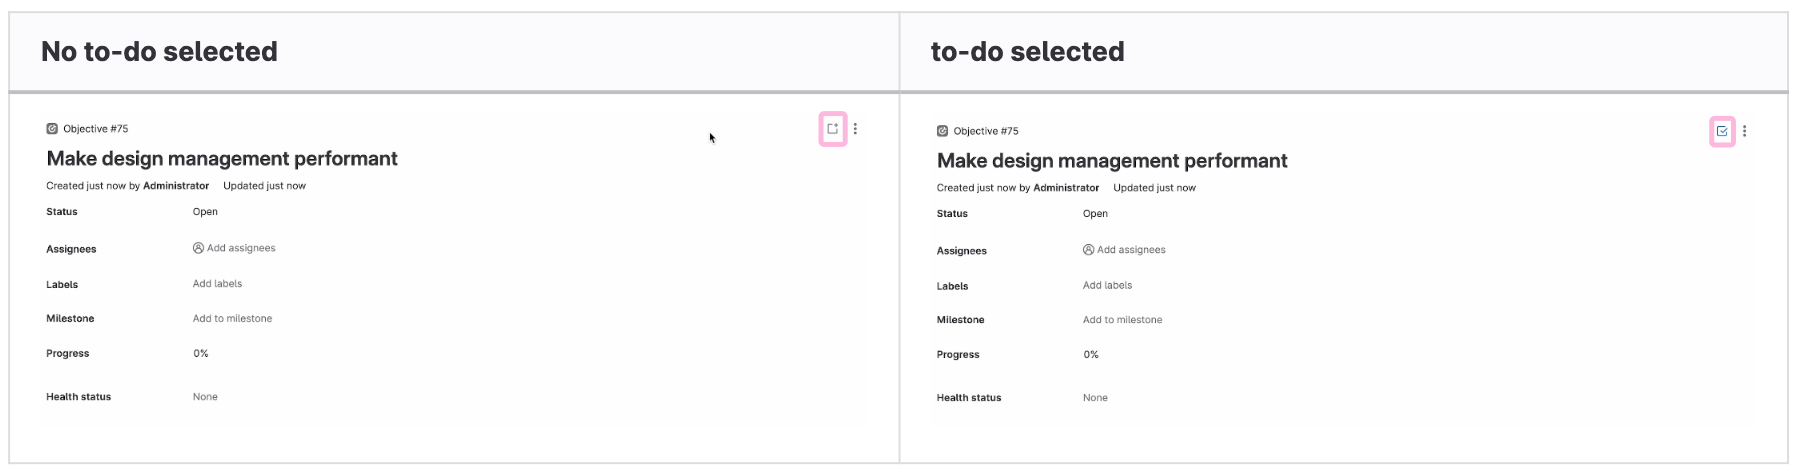 Add or resolve to-do items on tasks, objectives, and key results